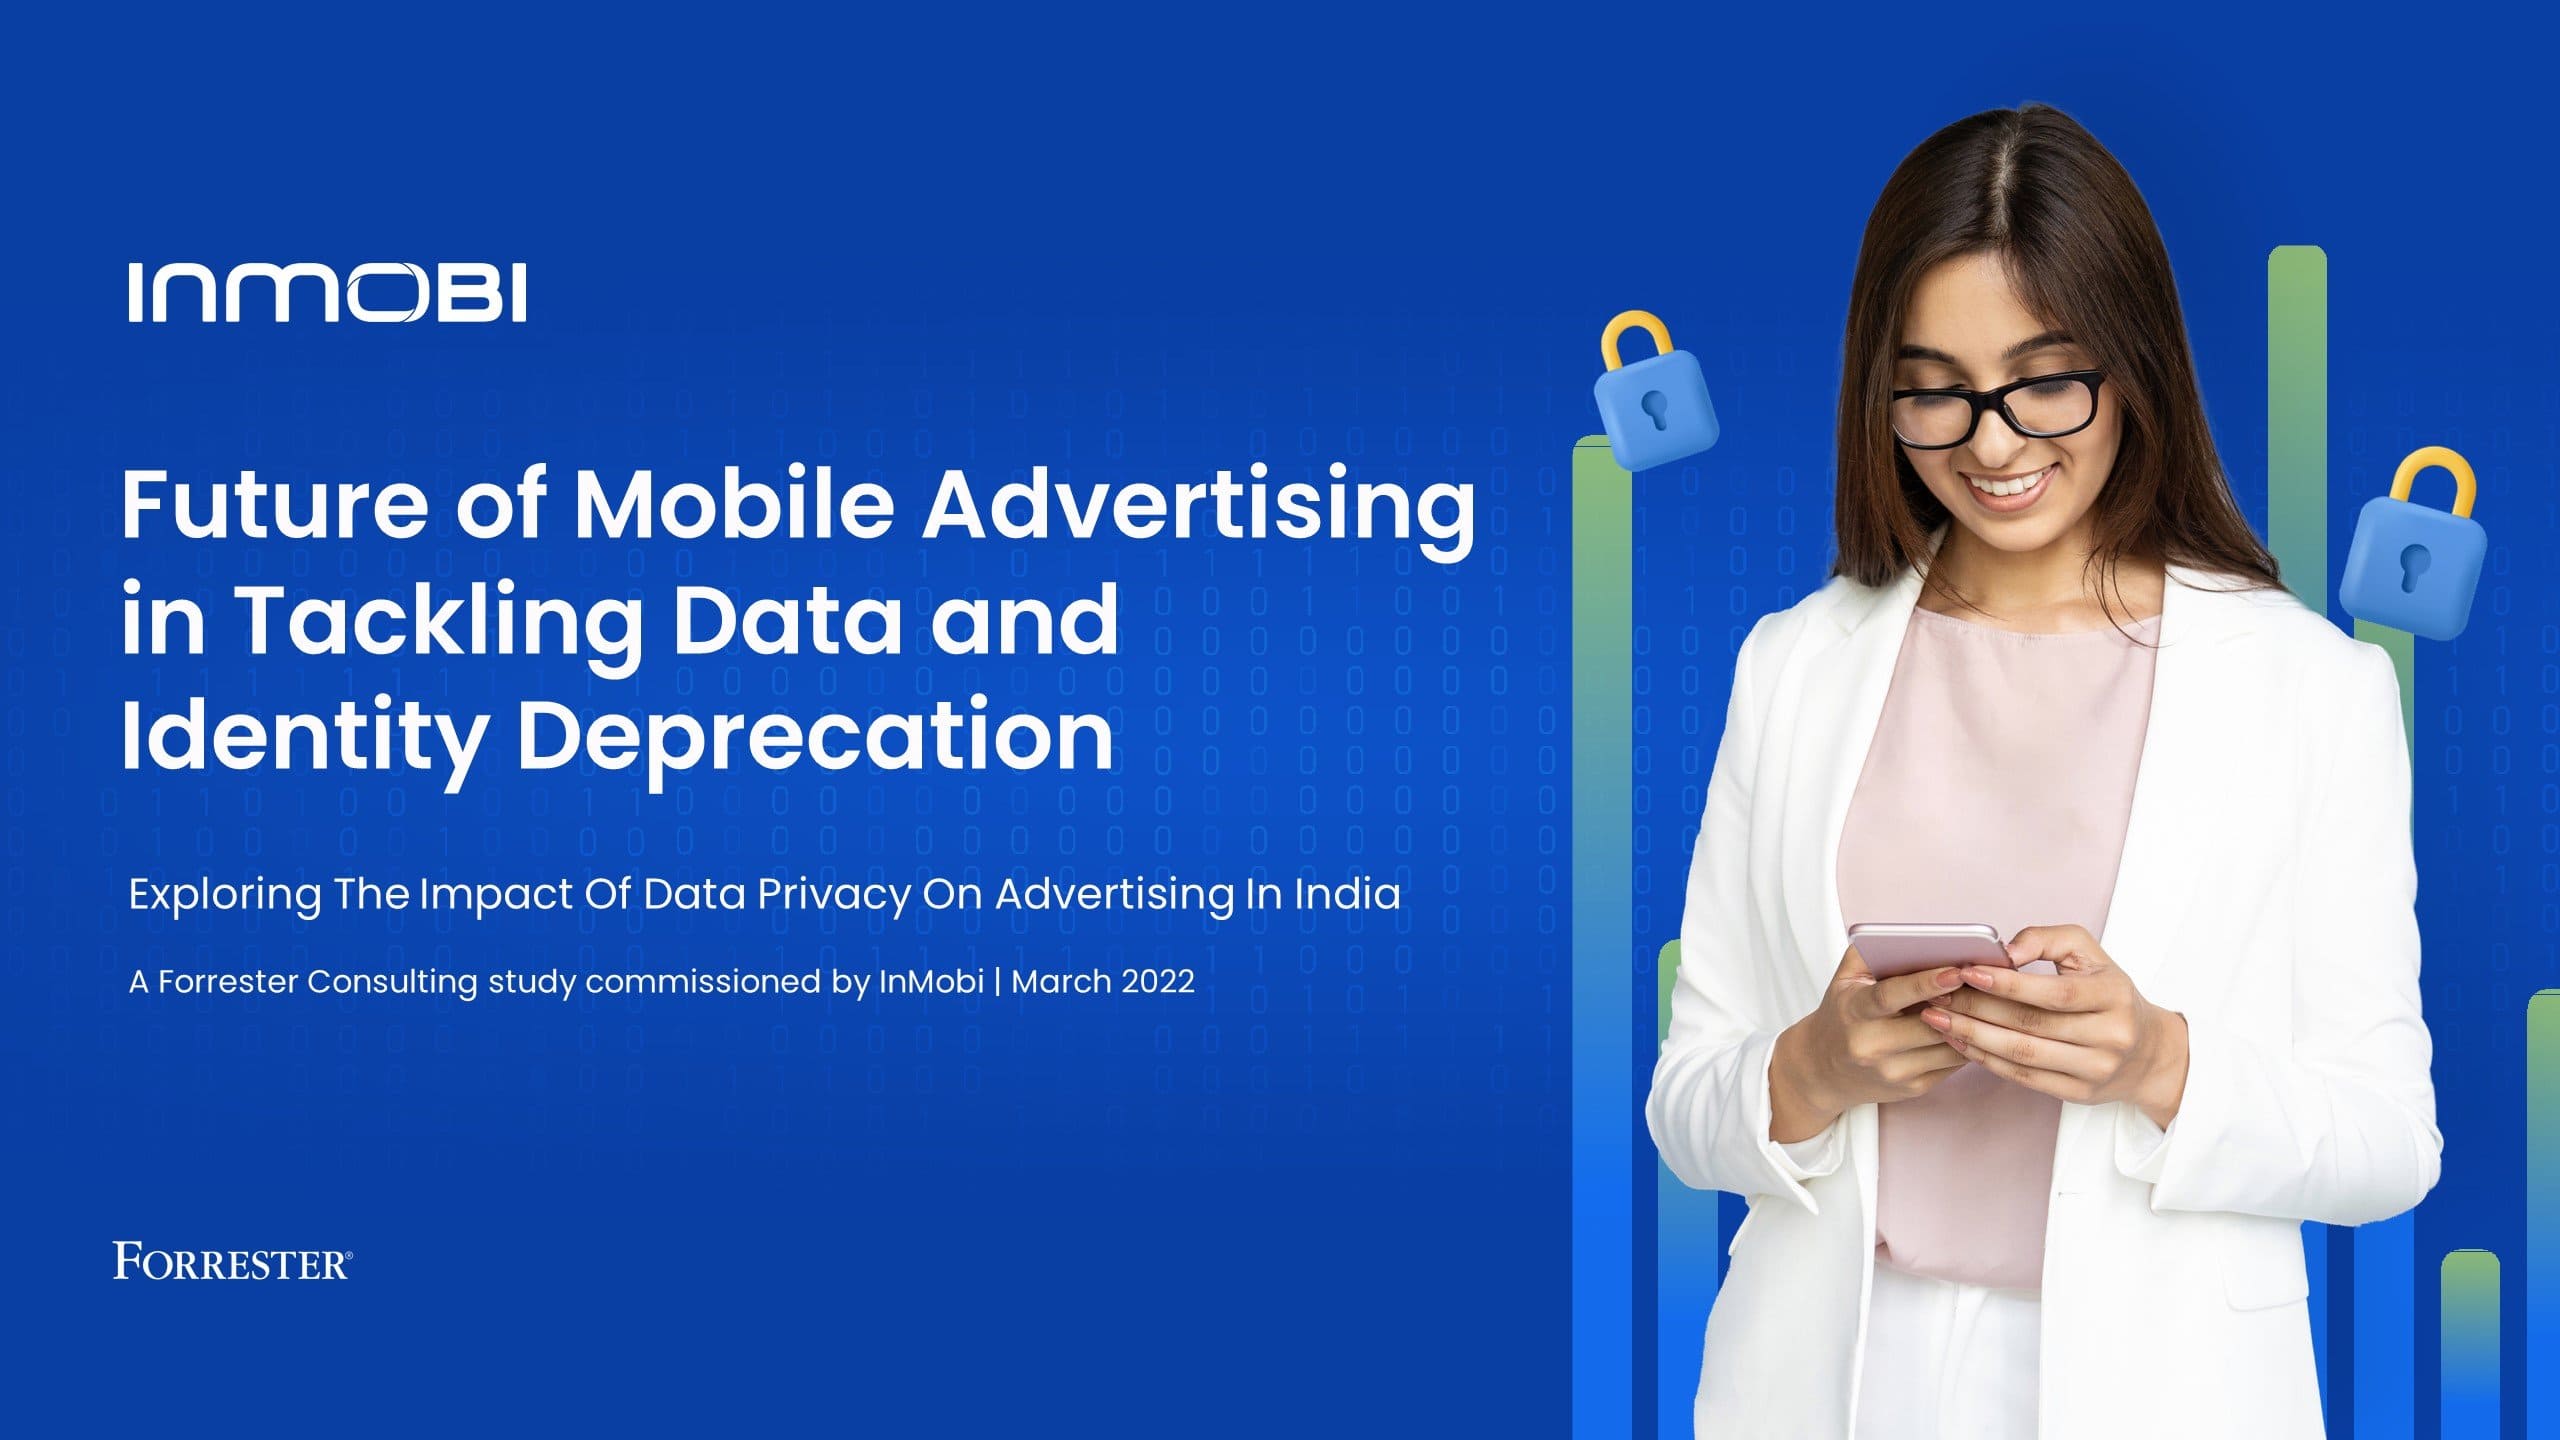 Decoding the Future of Mobile Advertising in Tackling Data and Identity Deprecation